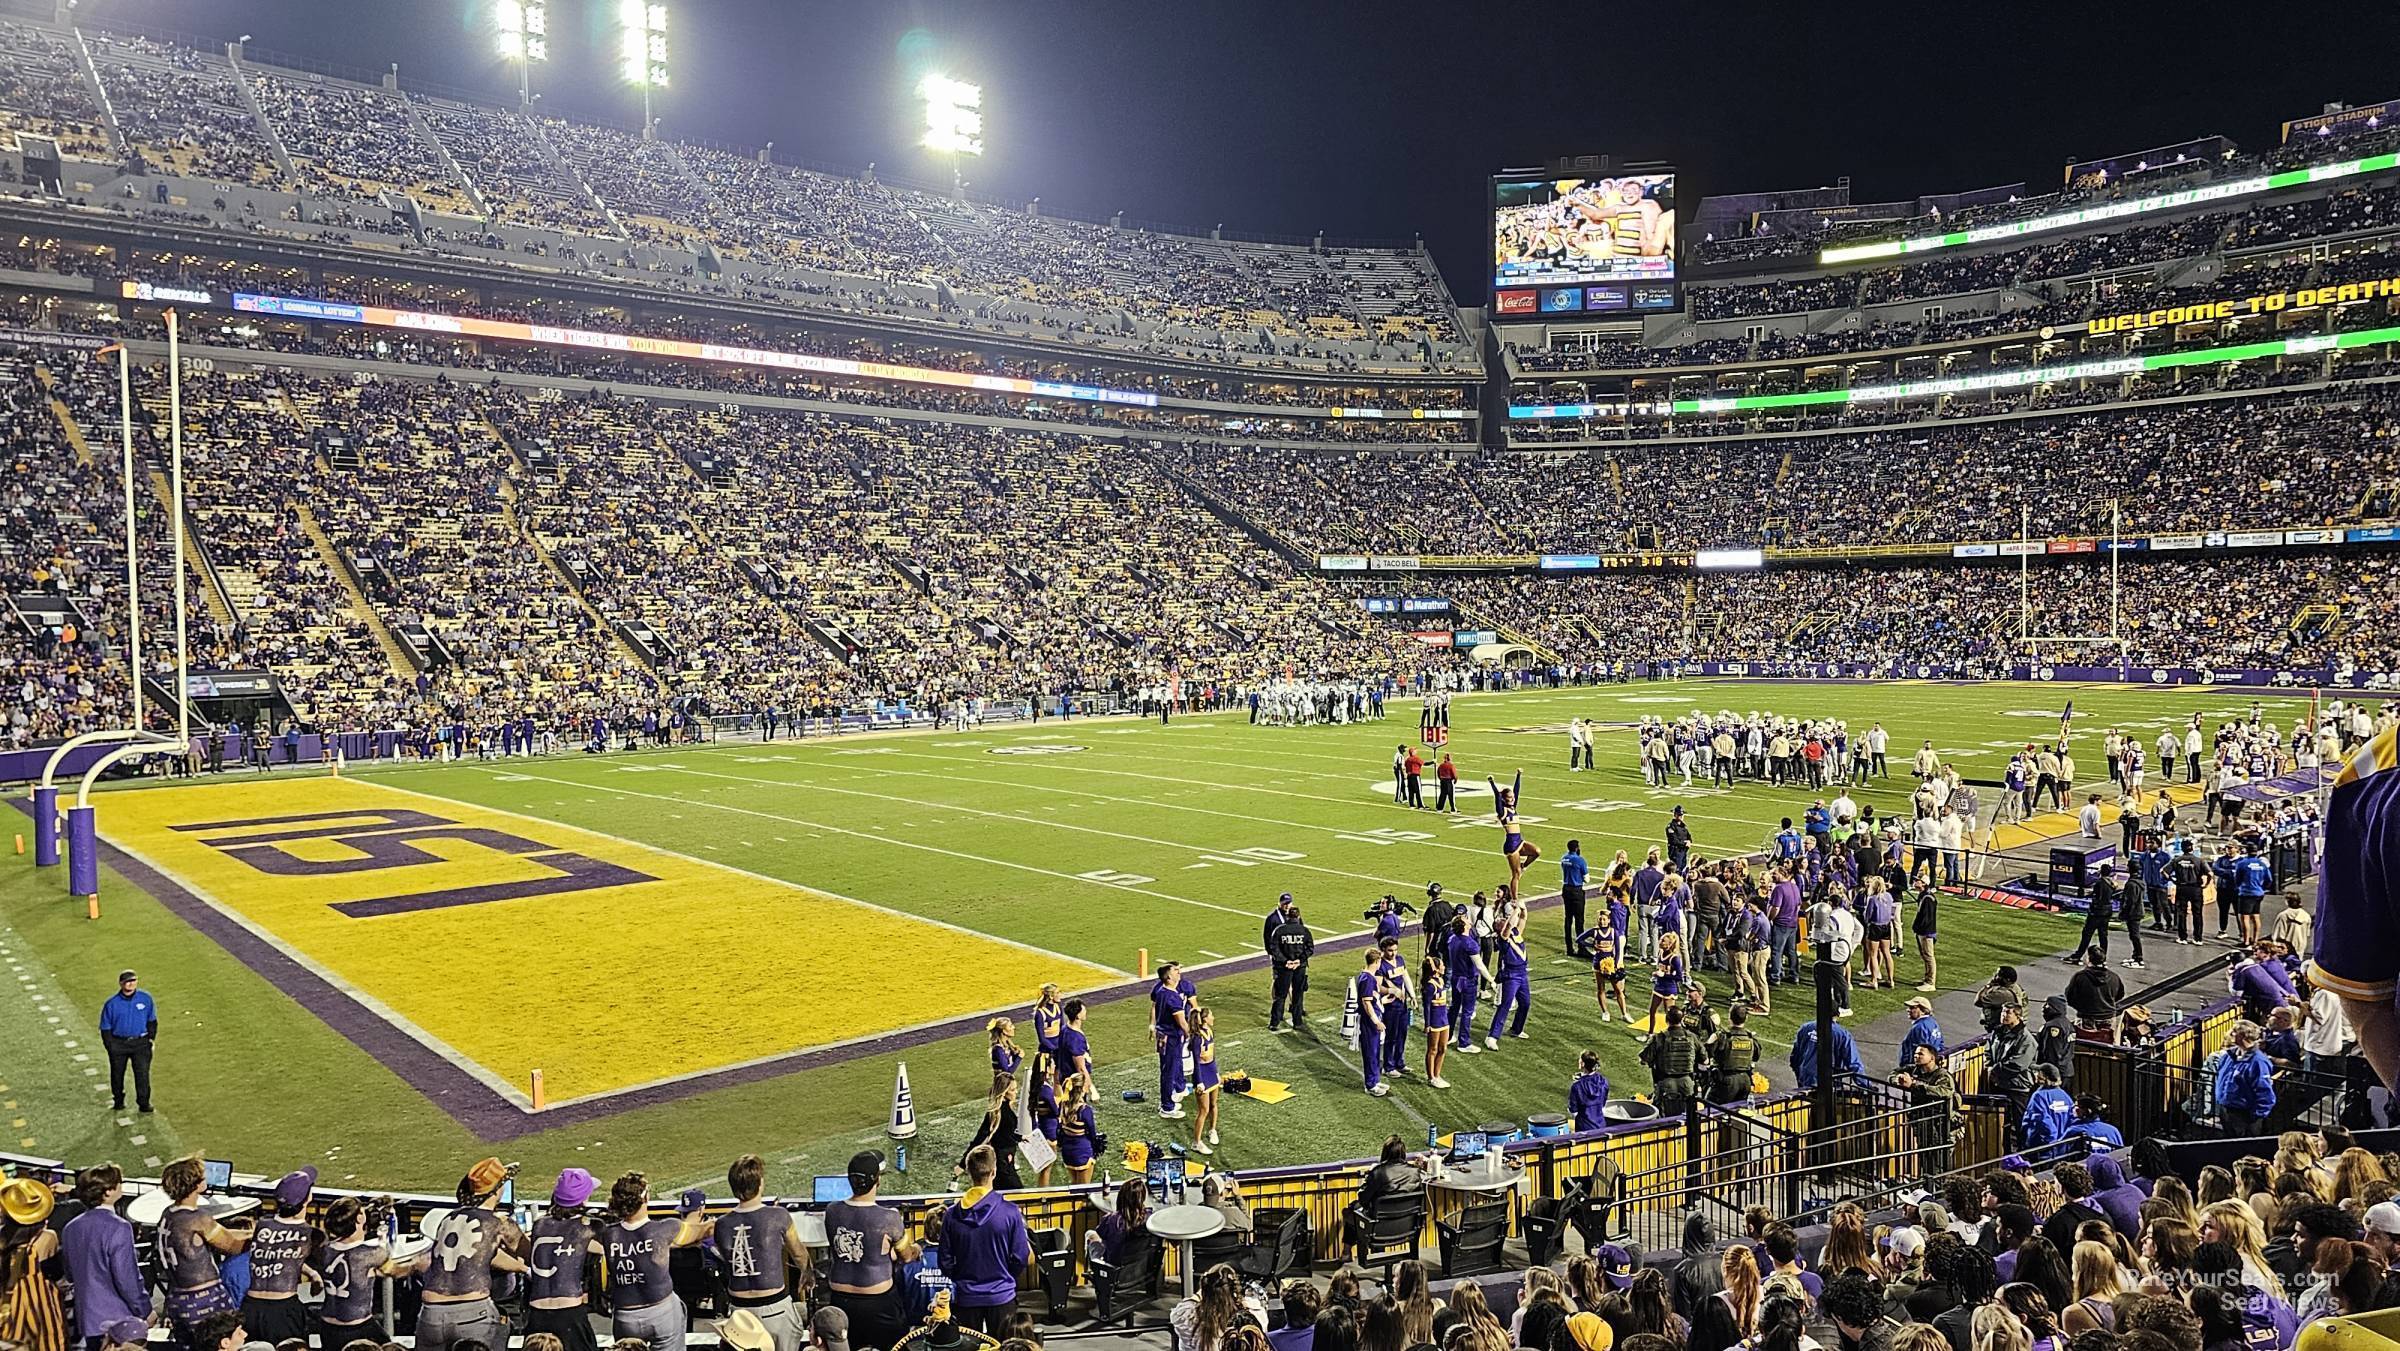 section 220, row 1 seat view  - tiger stadium